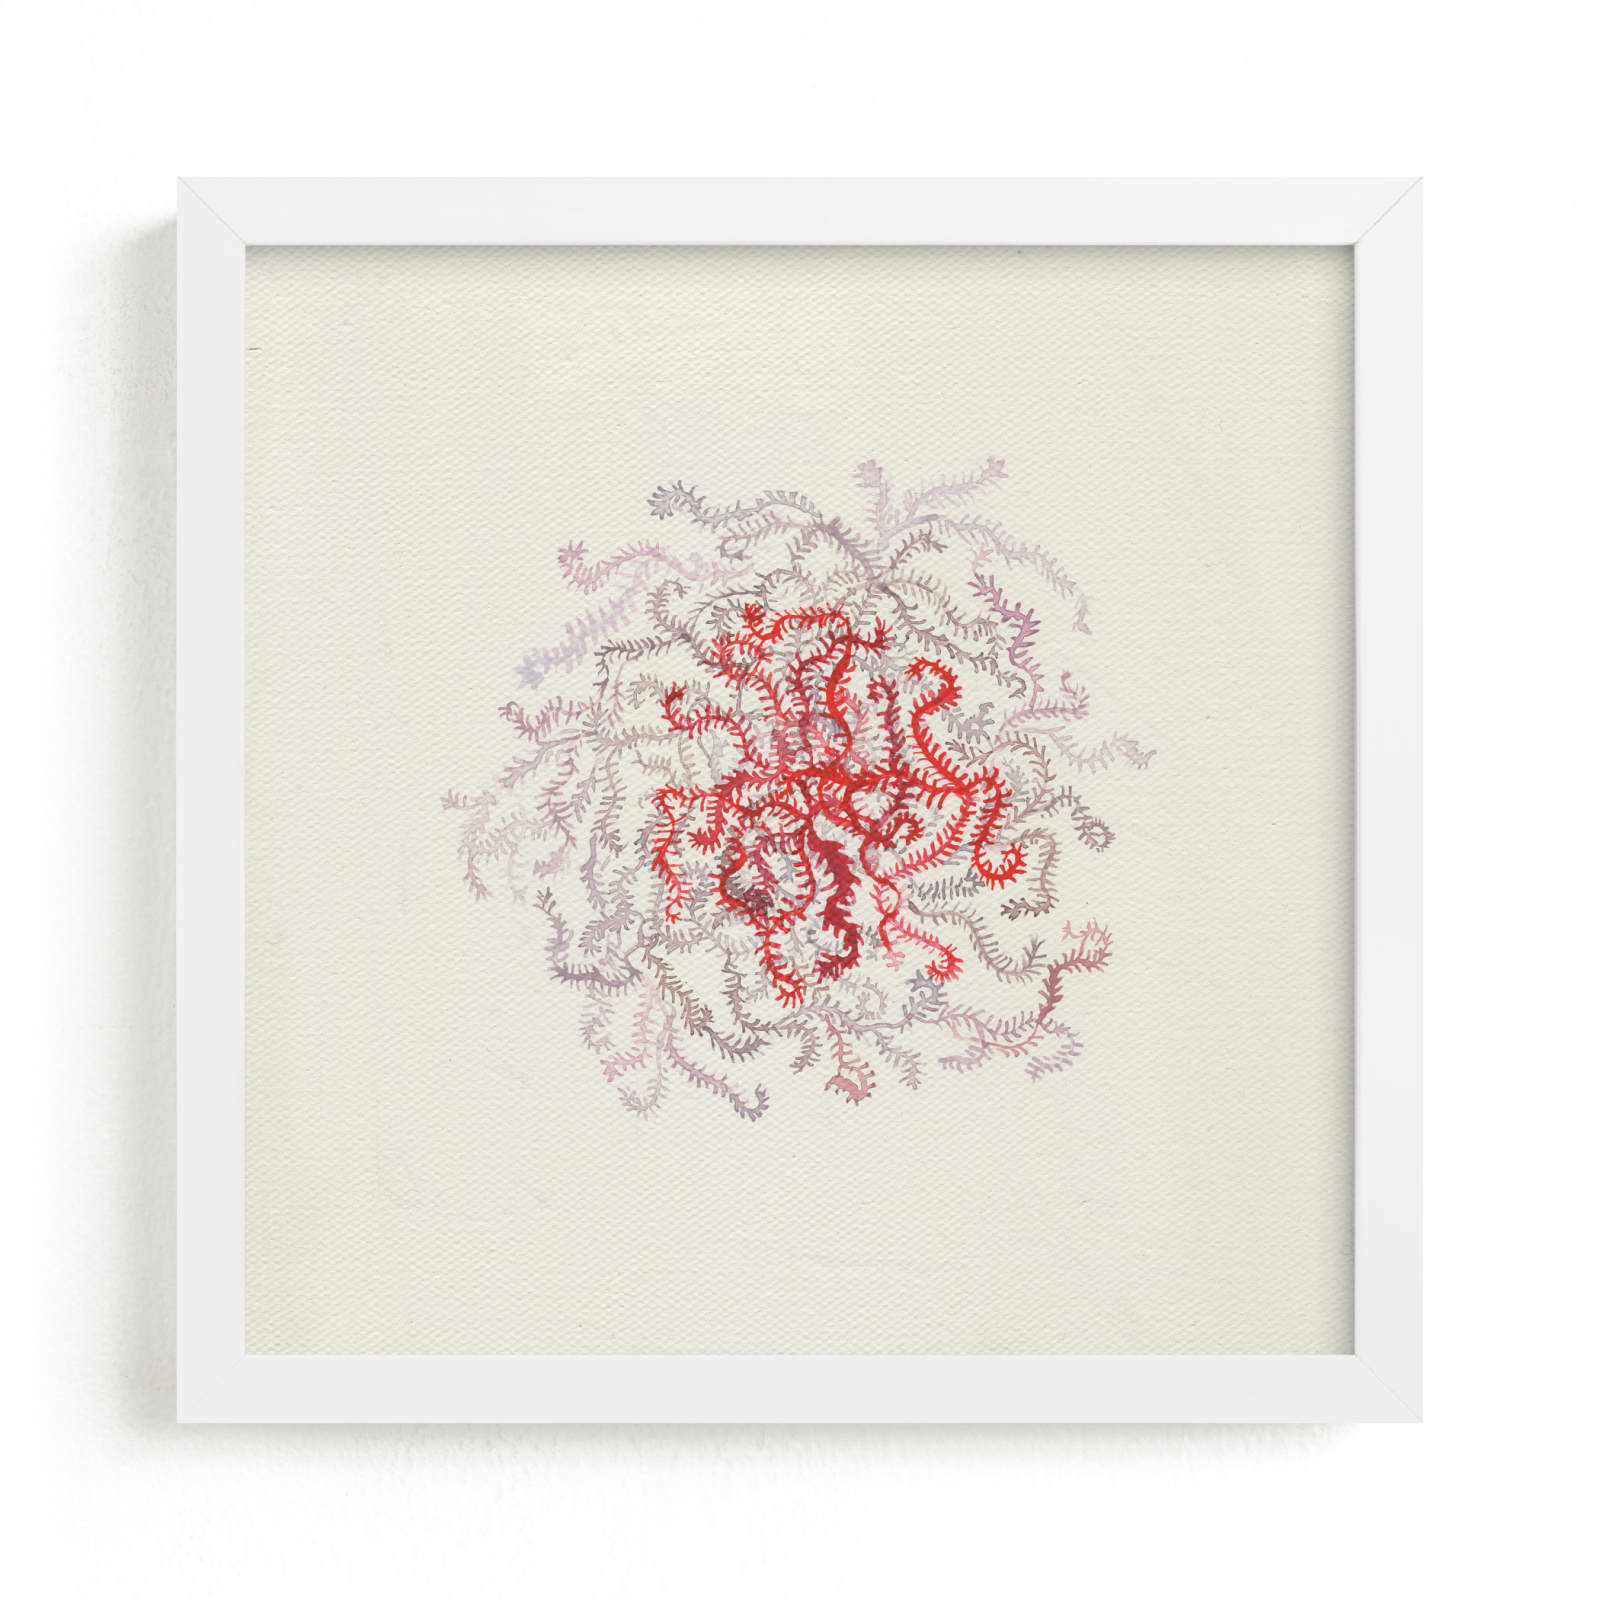 "RED STUDY II / Moss" by Aspa Gika in beautiful frame options and a variety of sizes.